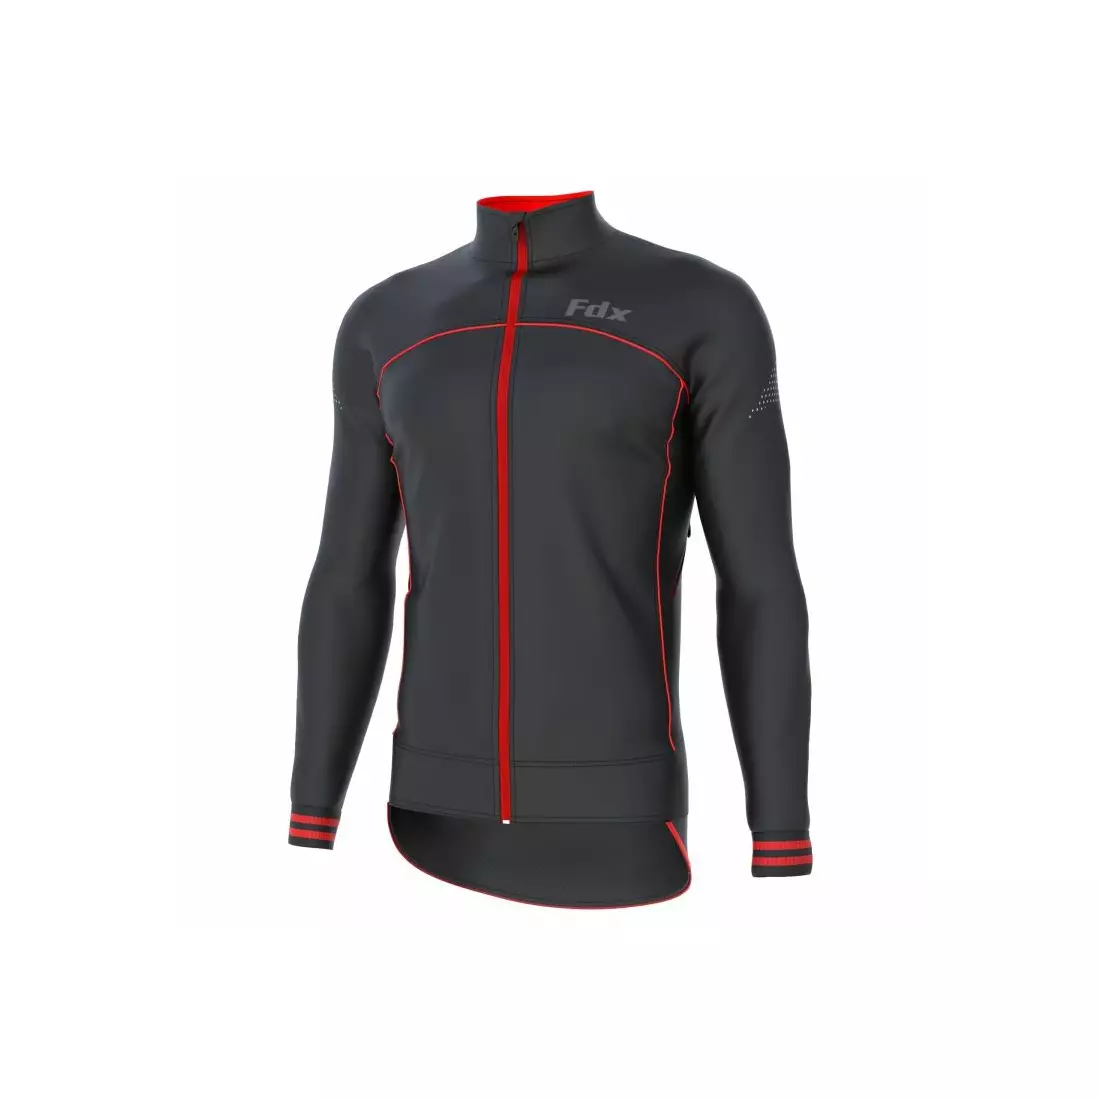 FDX 1310 men's insulated cycling jacket, black and red